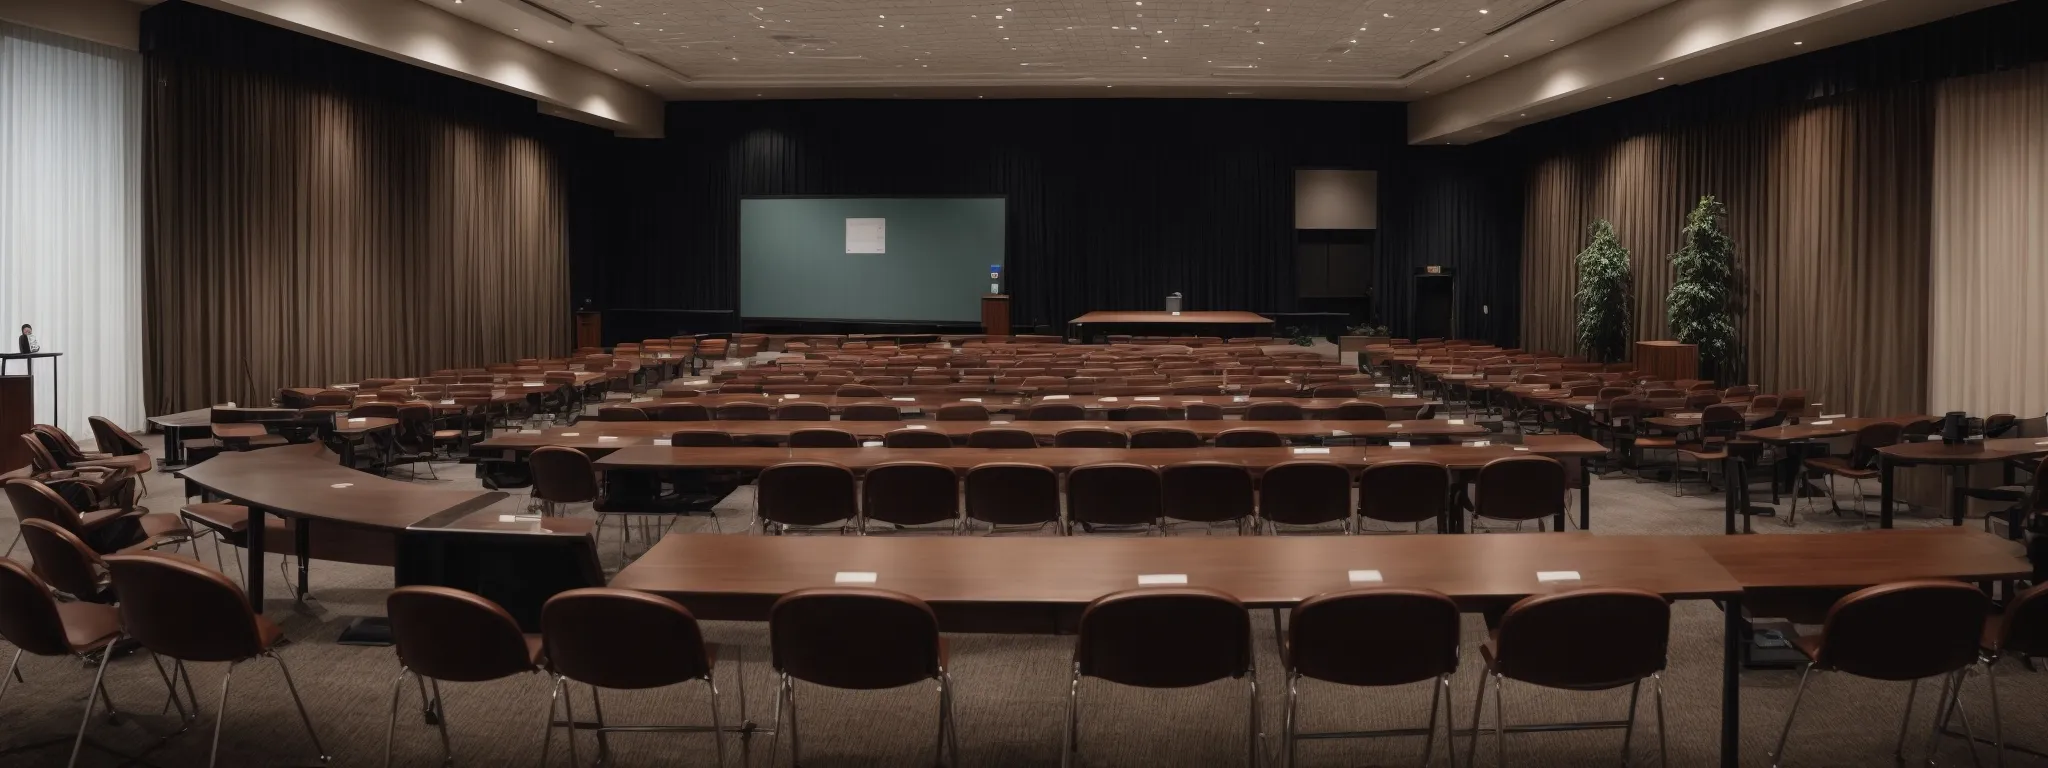 a professional conference room setup for an seo seminar with a large presentation screen and rows of chairs.